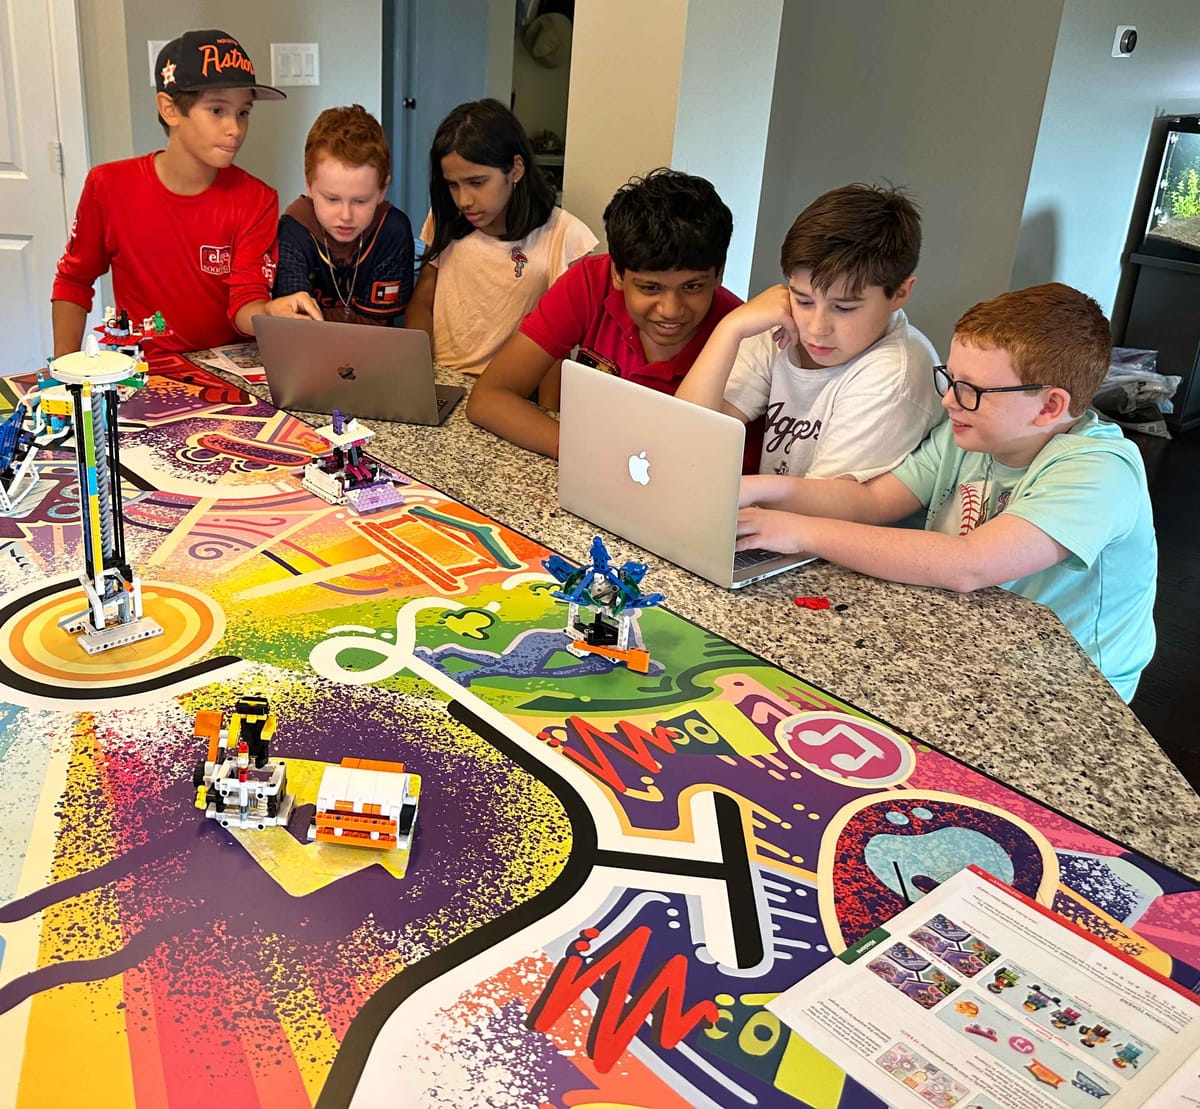 Getting started with FIRST LEGO League